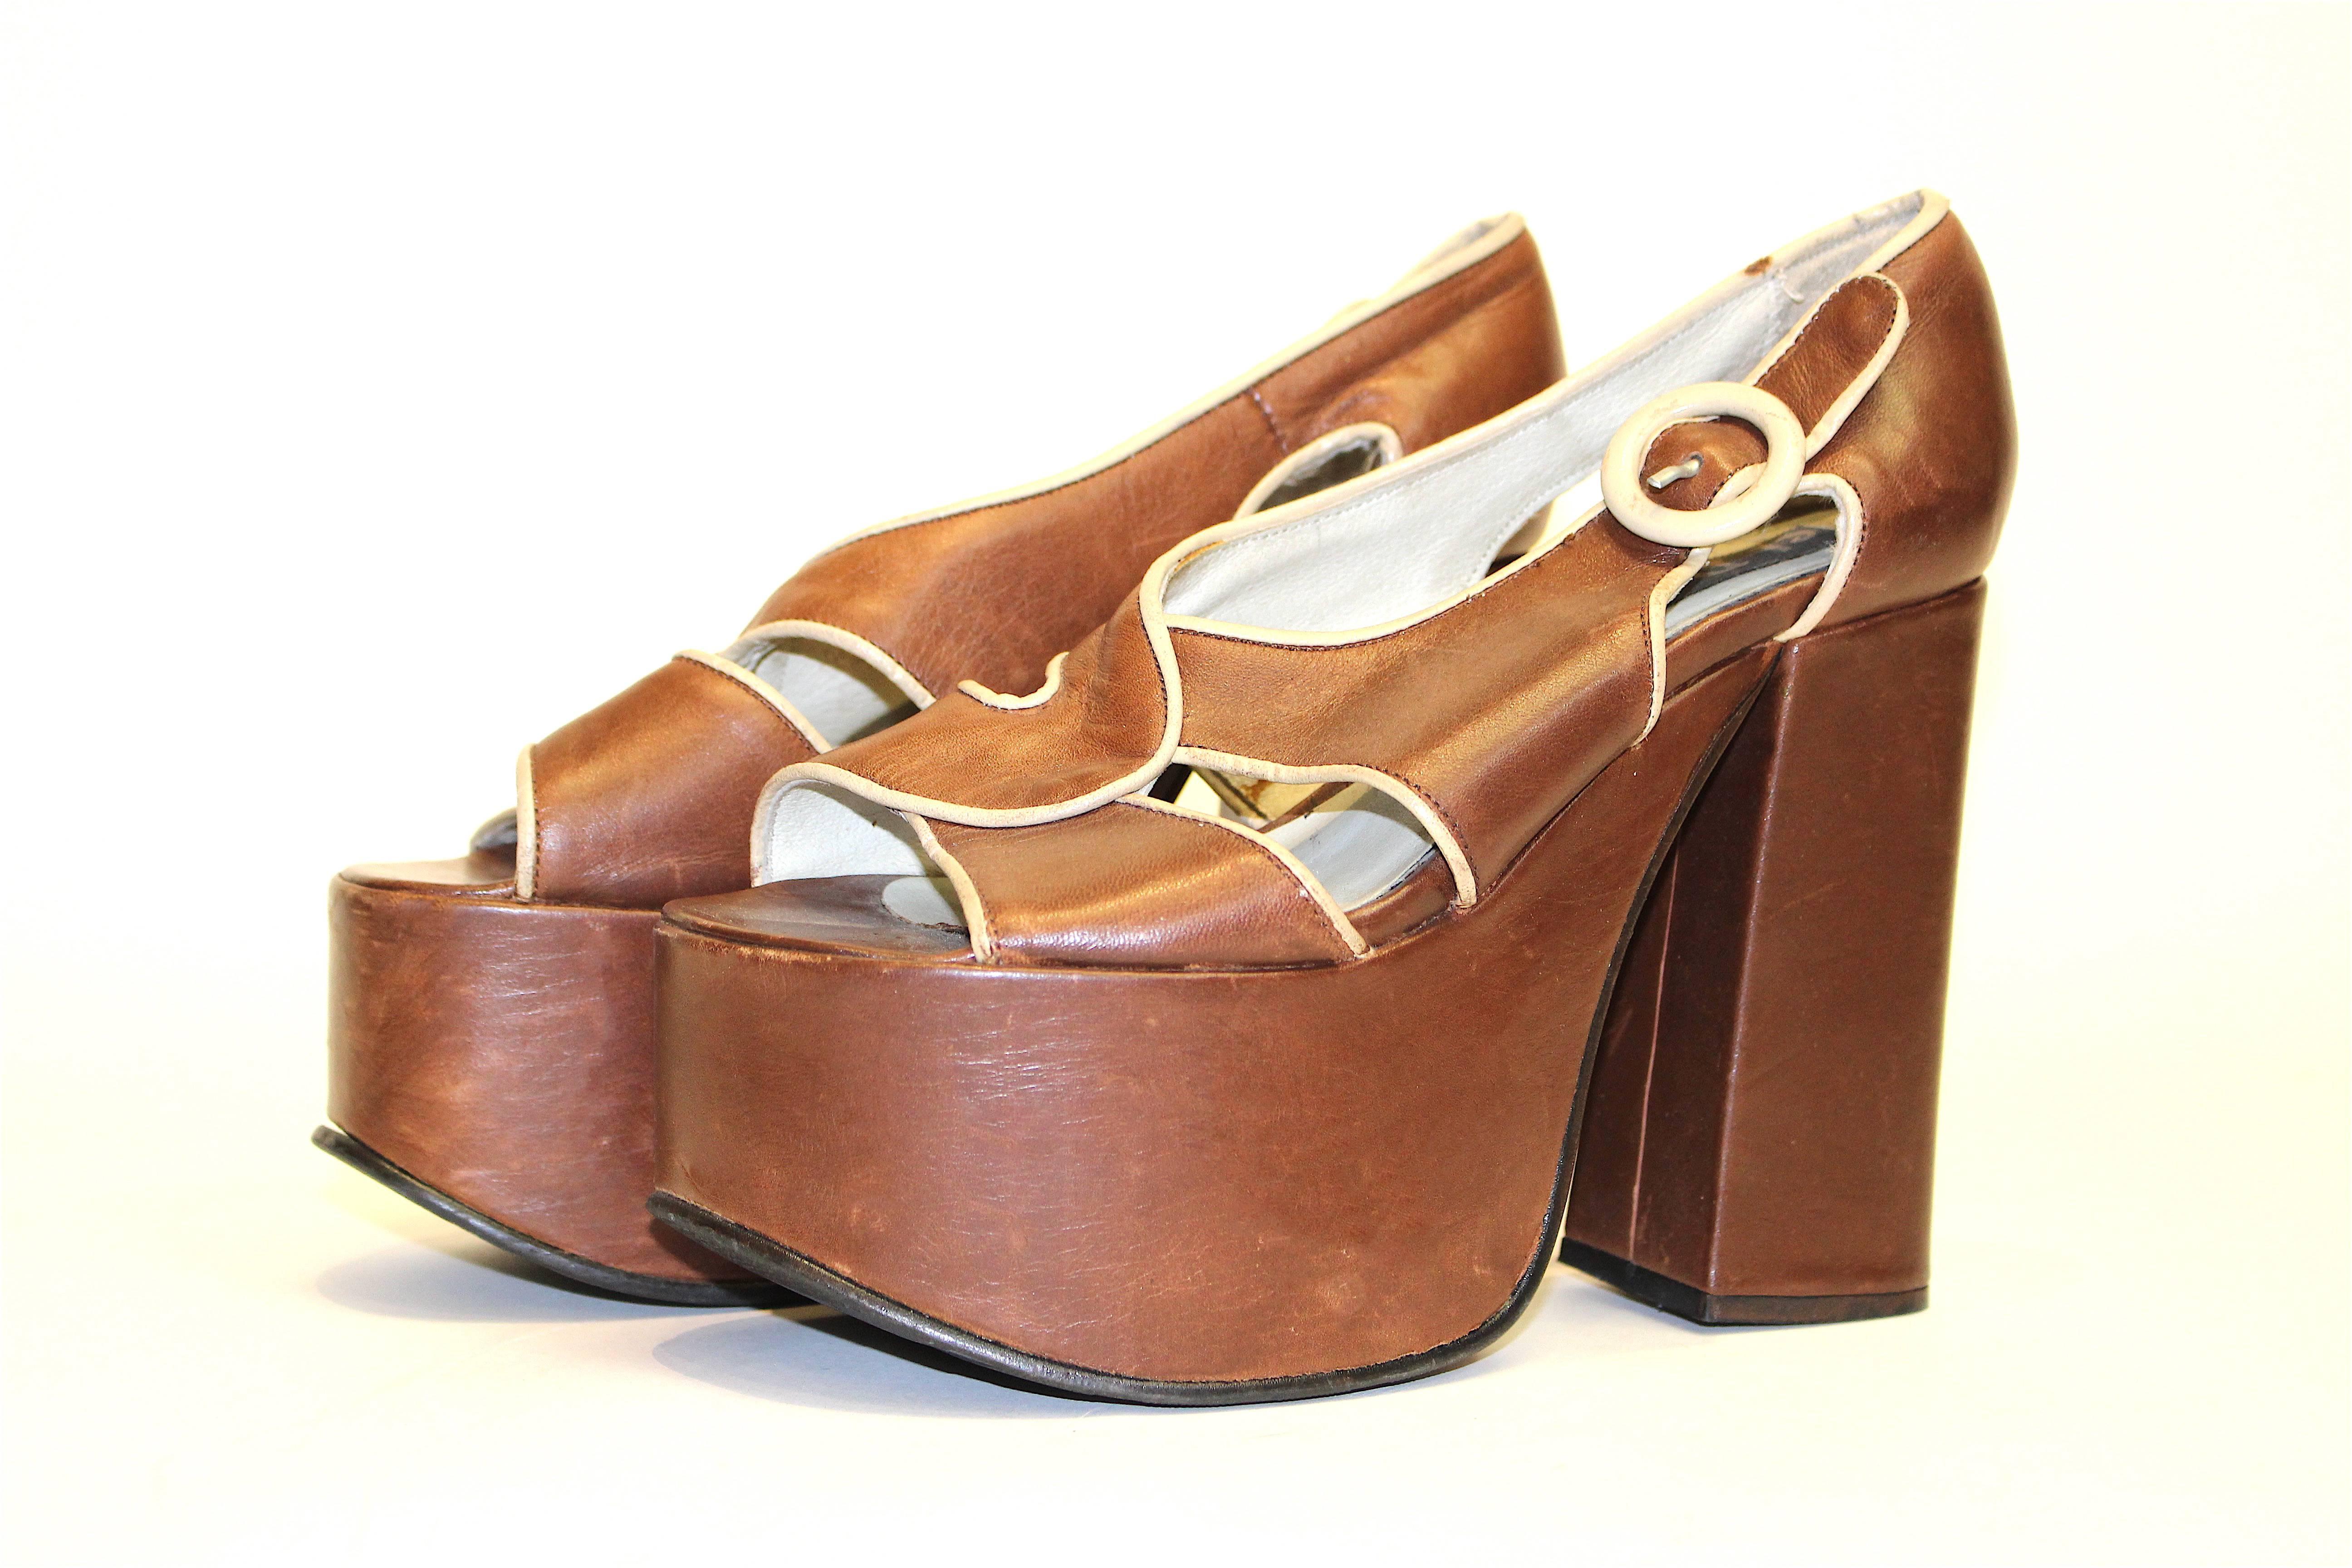 El Dantes 70s Platform shoe Brown leather with cream colored piping and buckle. Slip-on shoes w/ faux buckle closure. Some wear on leather, namely on the buckle.

US size 6 with an approximately 3 inch width